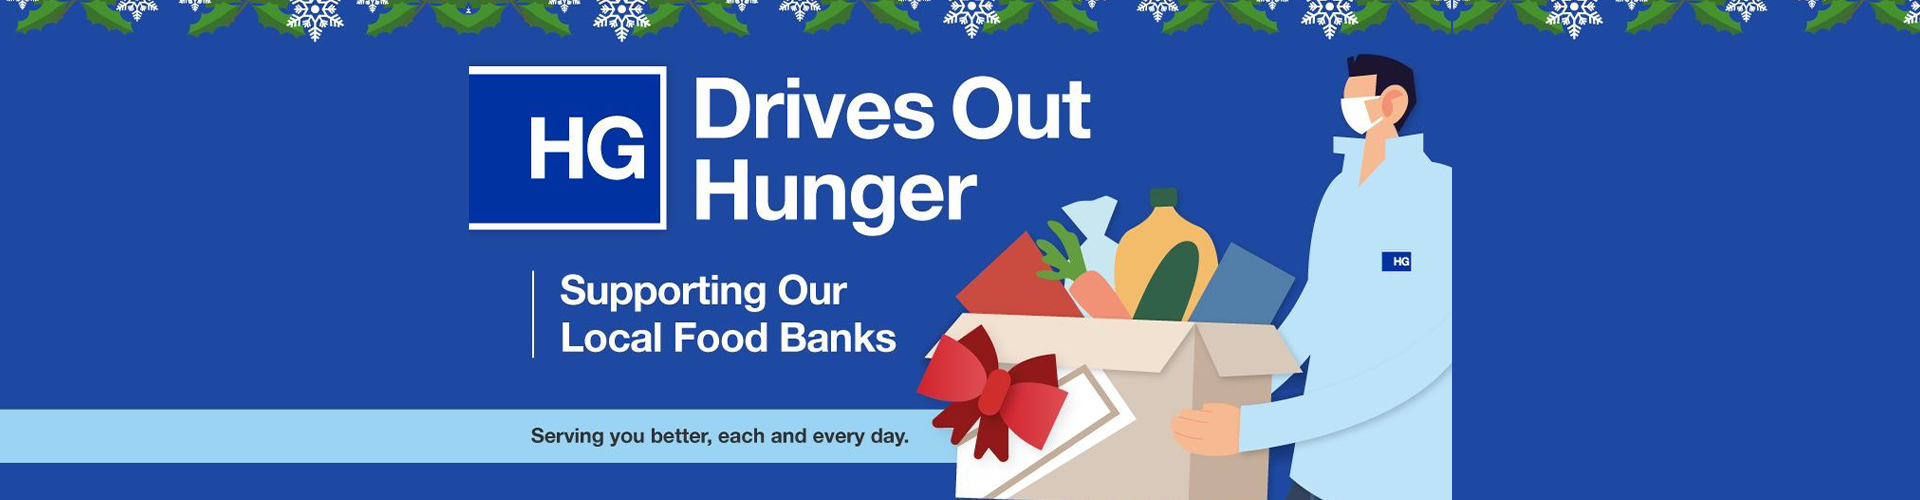 HG Drives Out Hunger